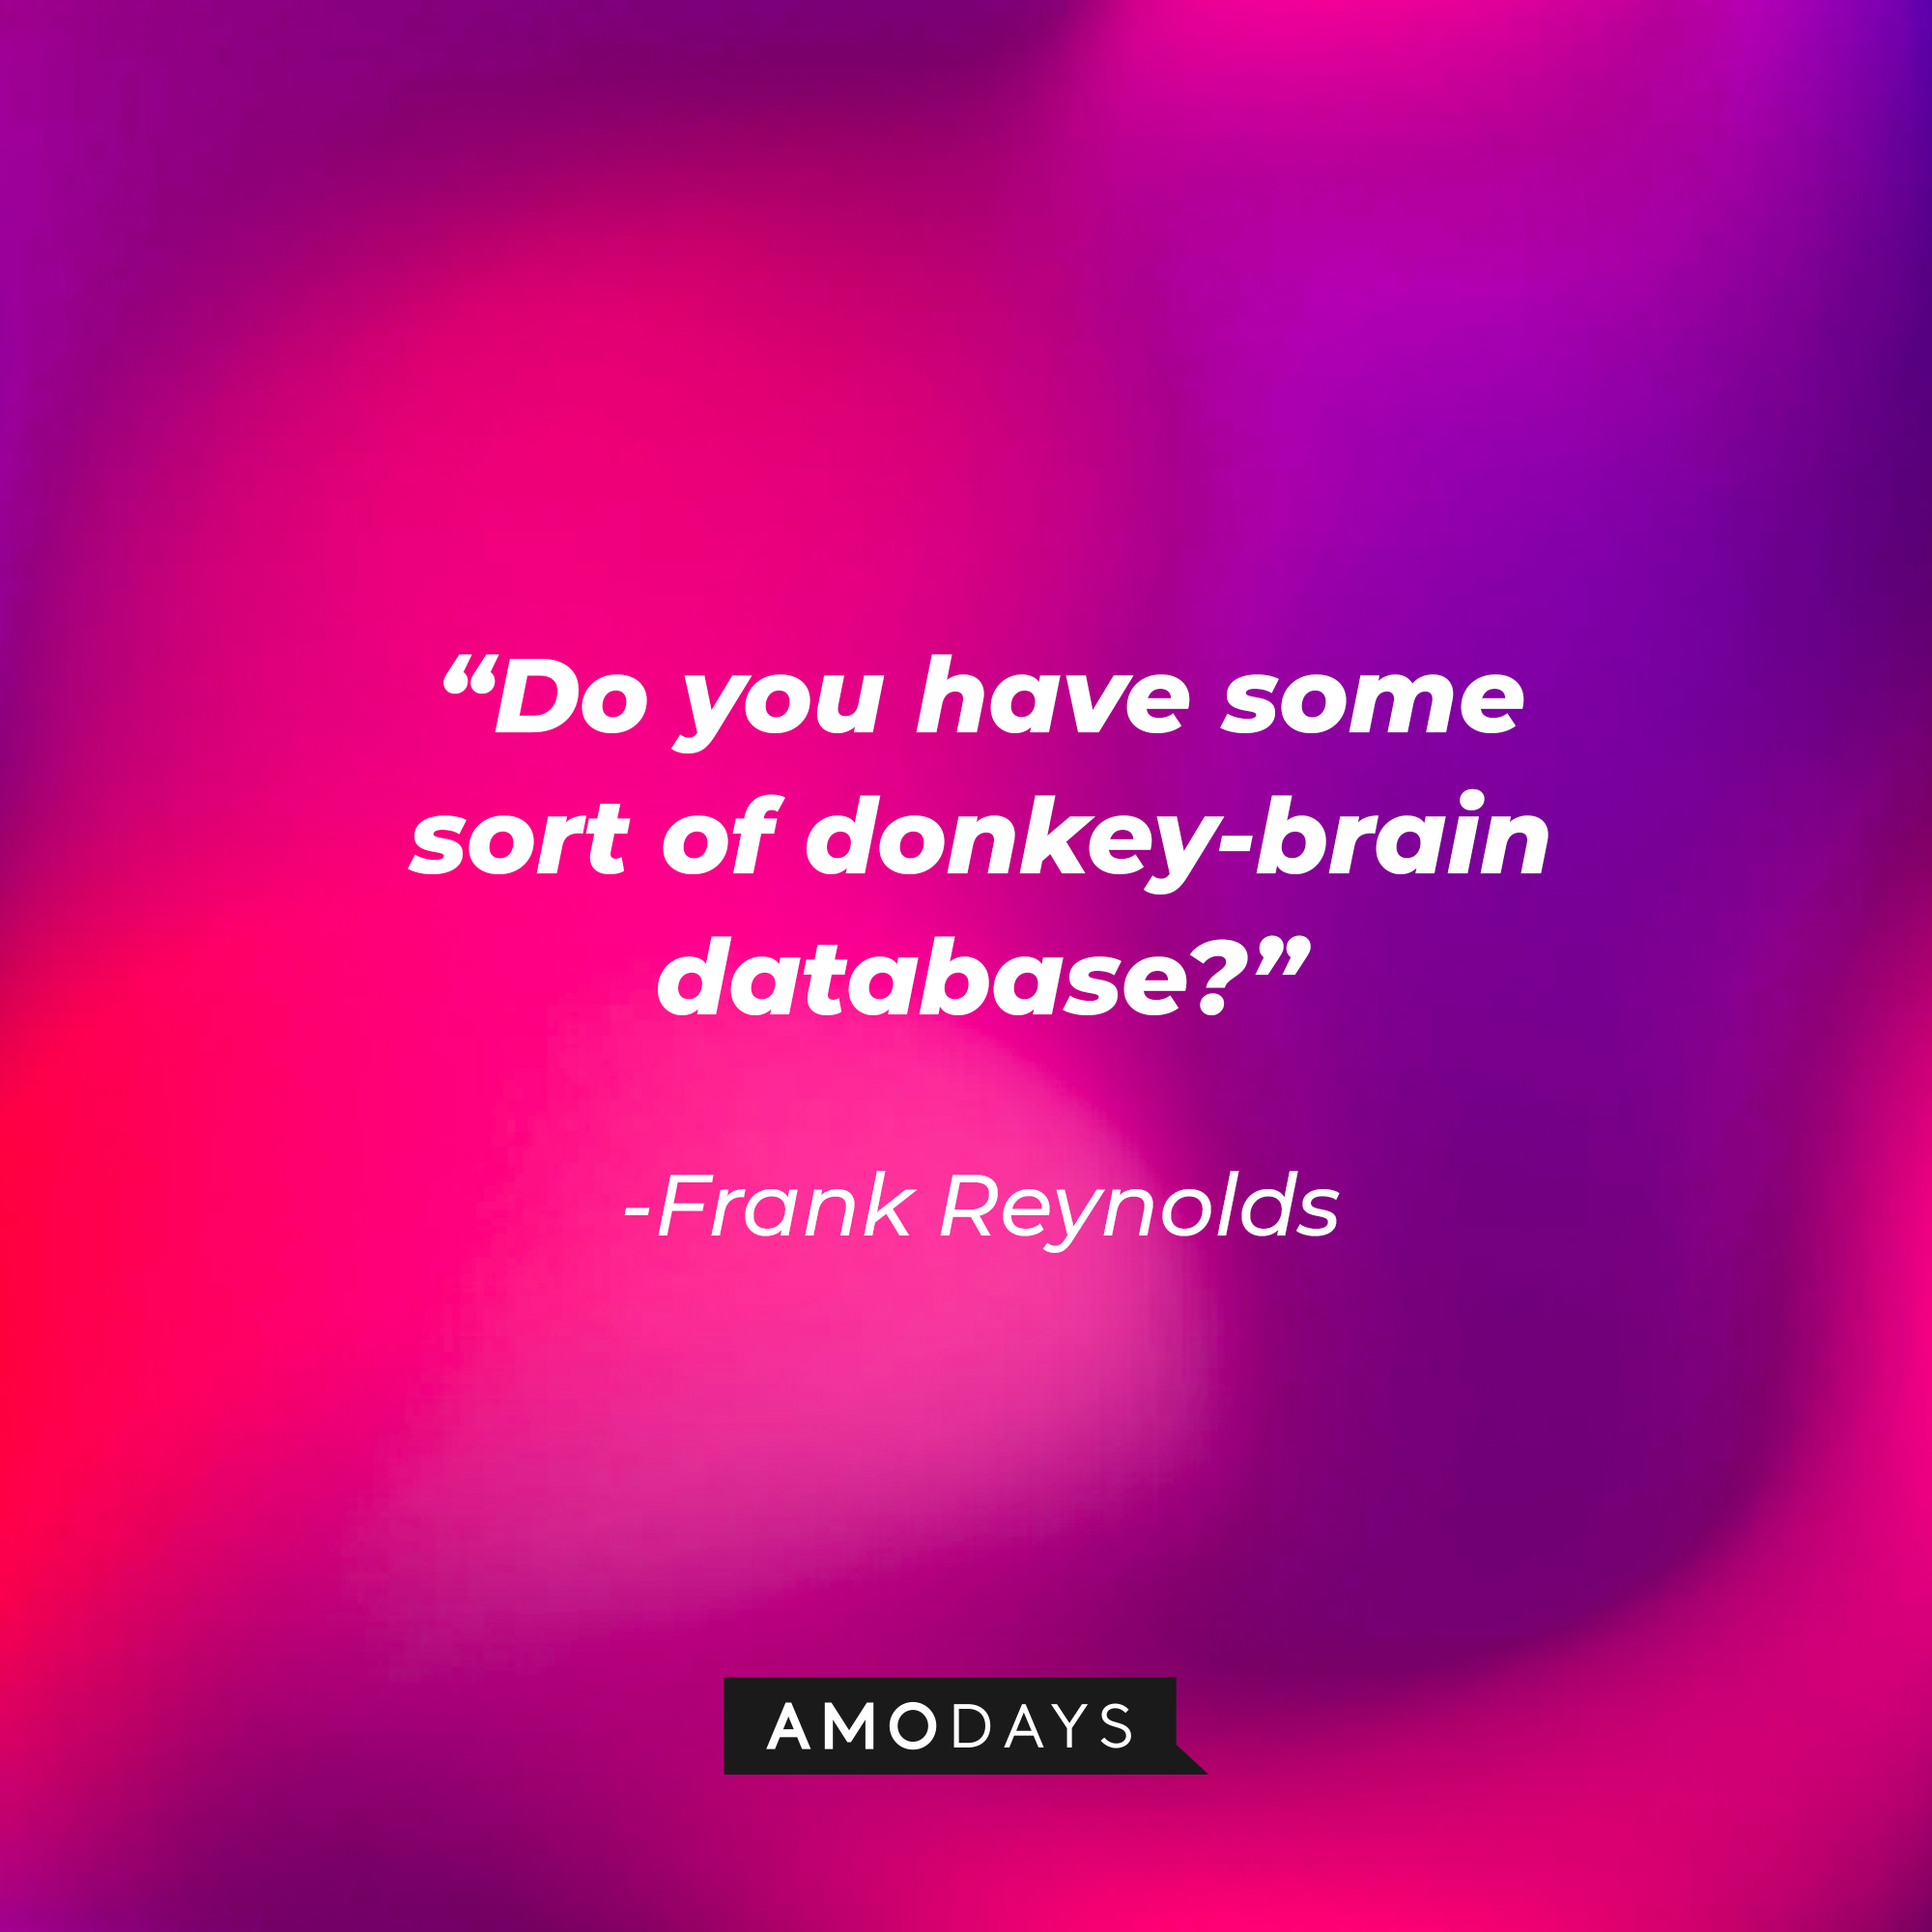 Frank Reynolds quote: "Do you have some sort of donkey-brain database?" | Source: facebook.com/alwayssunny